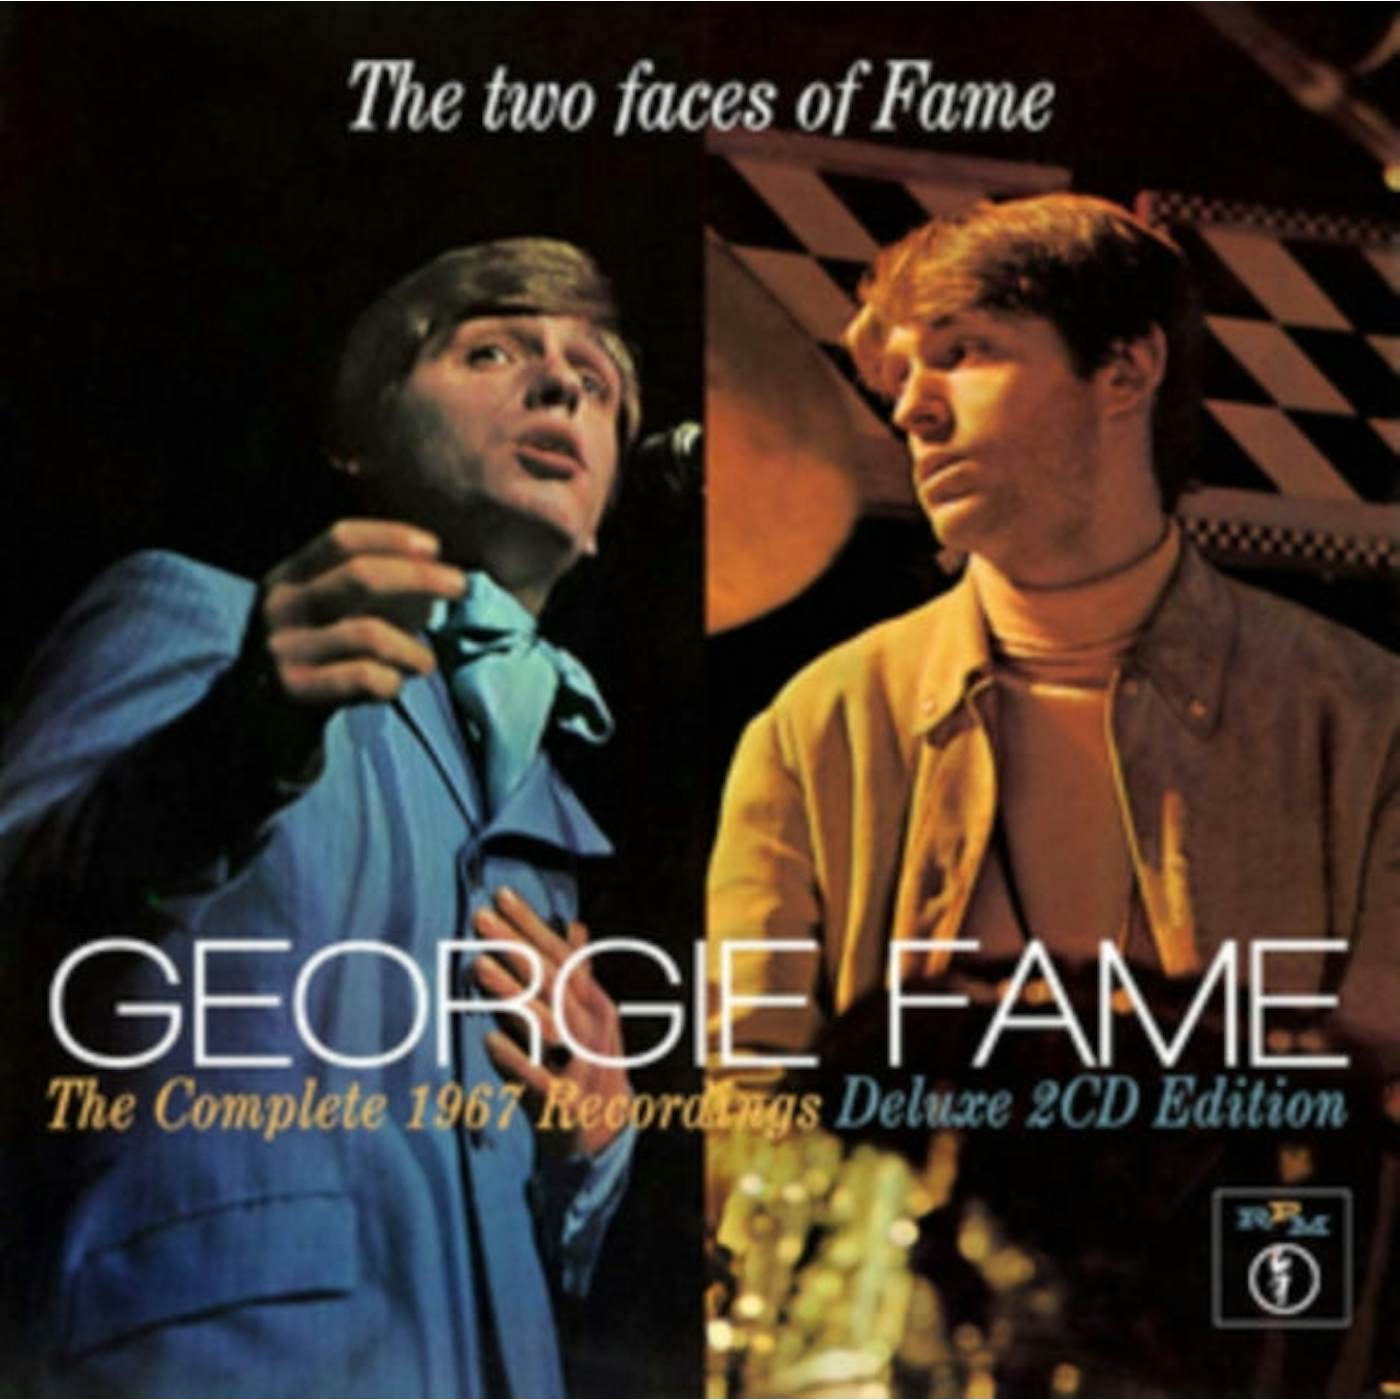 Georgie Fame CD - The Two Faces Of Fame: The Complete 1967 Recordings